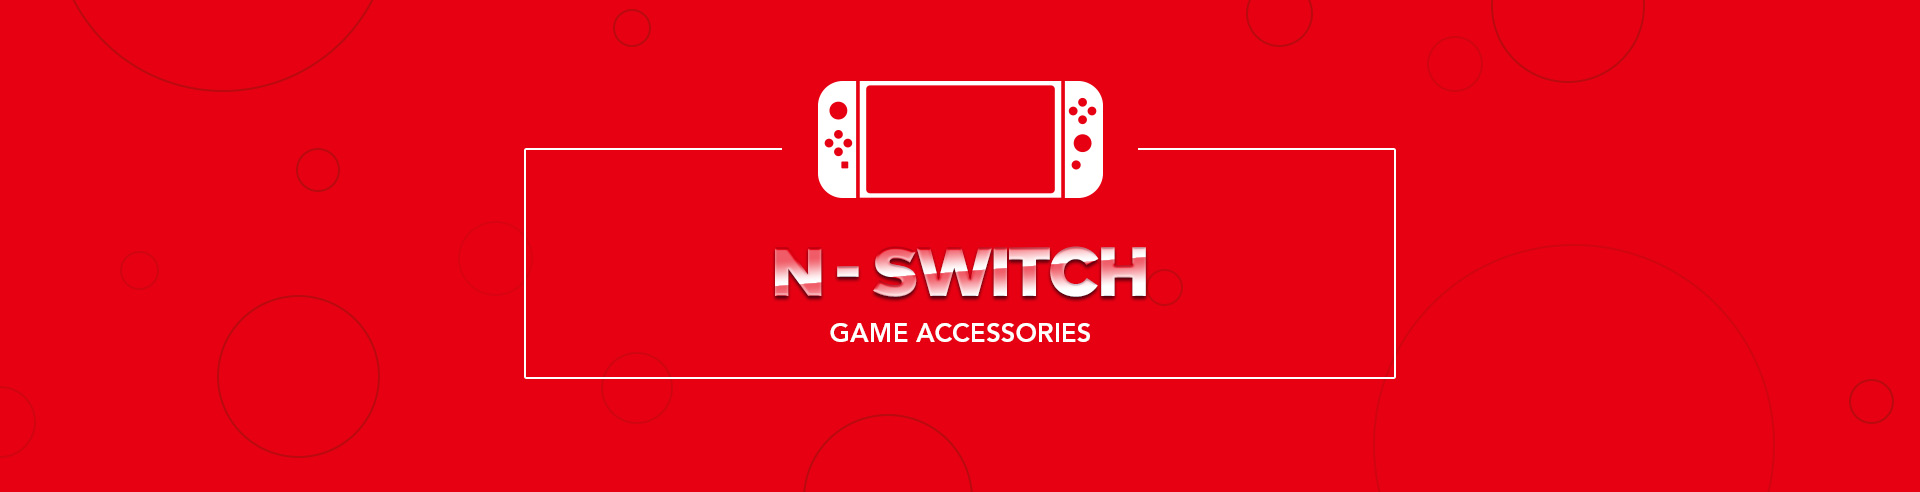 N-Switch Game Accessories